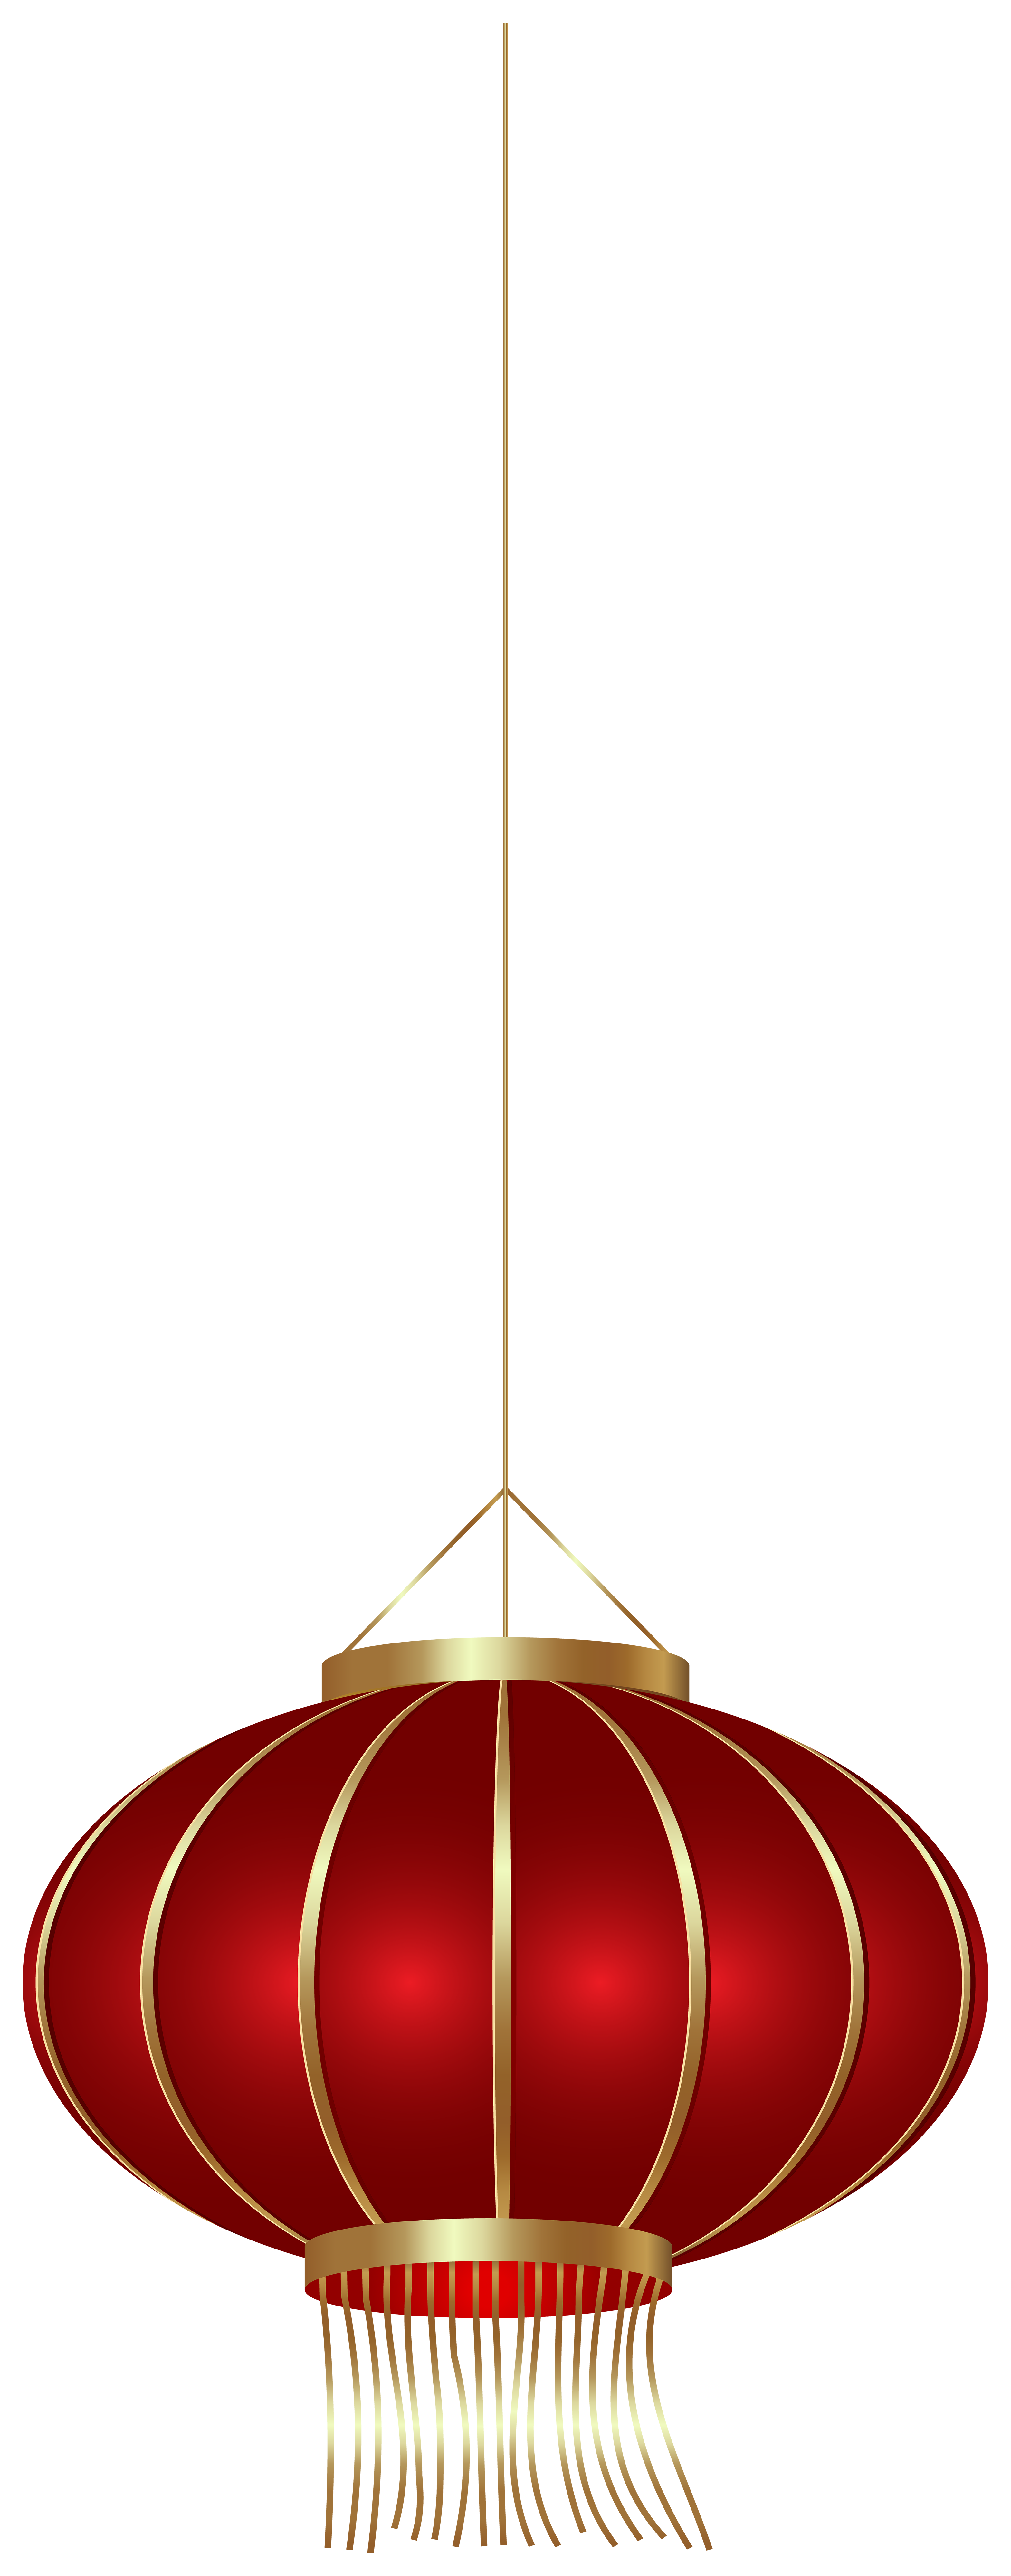 Large Chinese Lantern PNG Clip Art - Best WEB Clipart